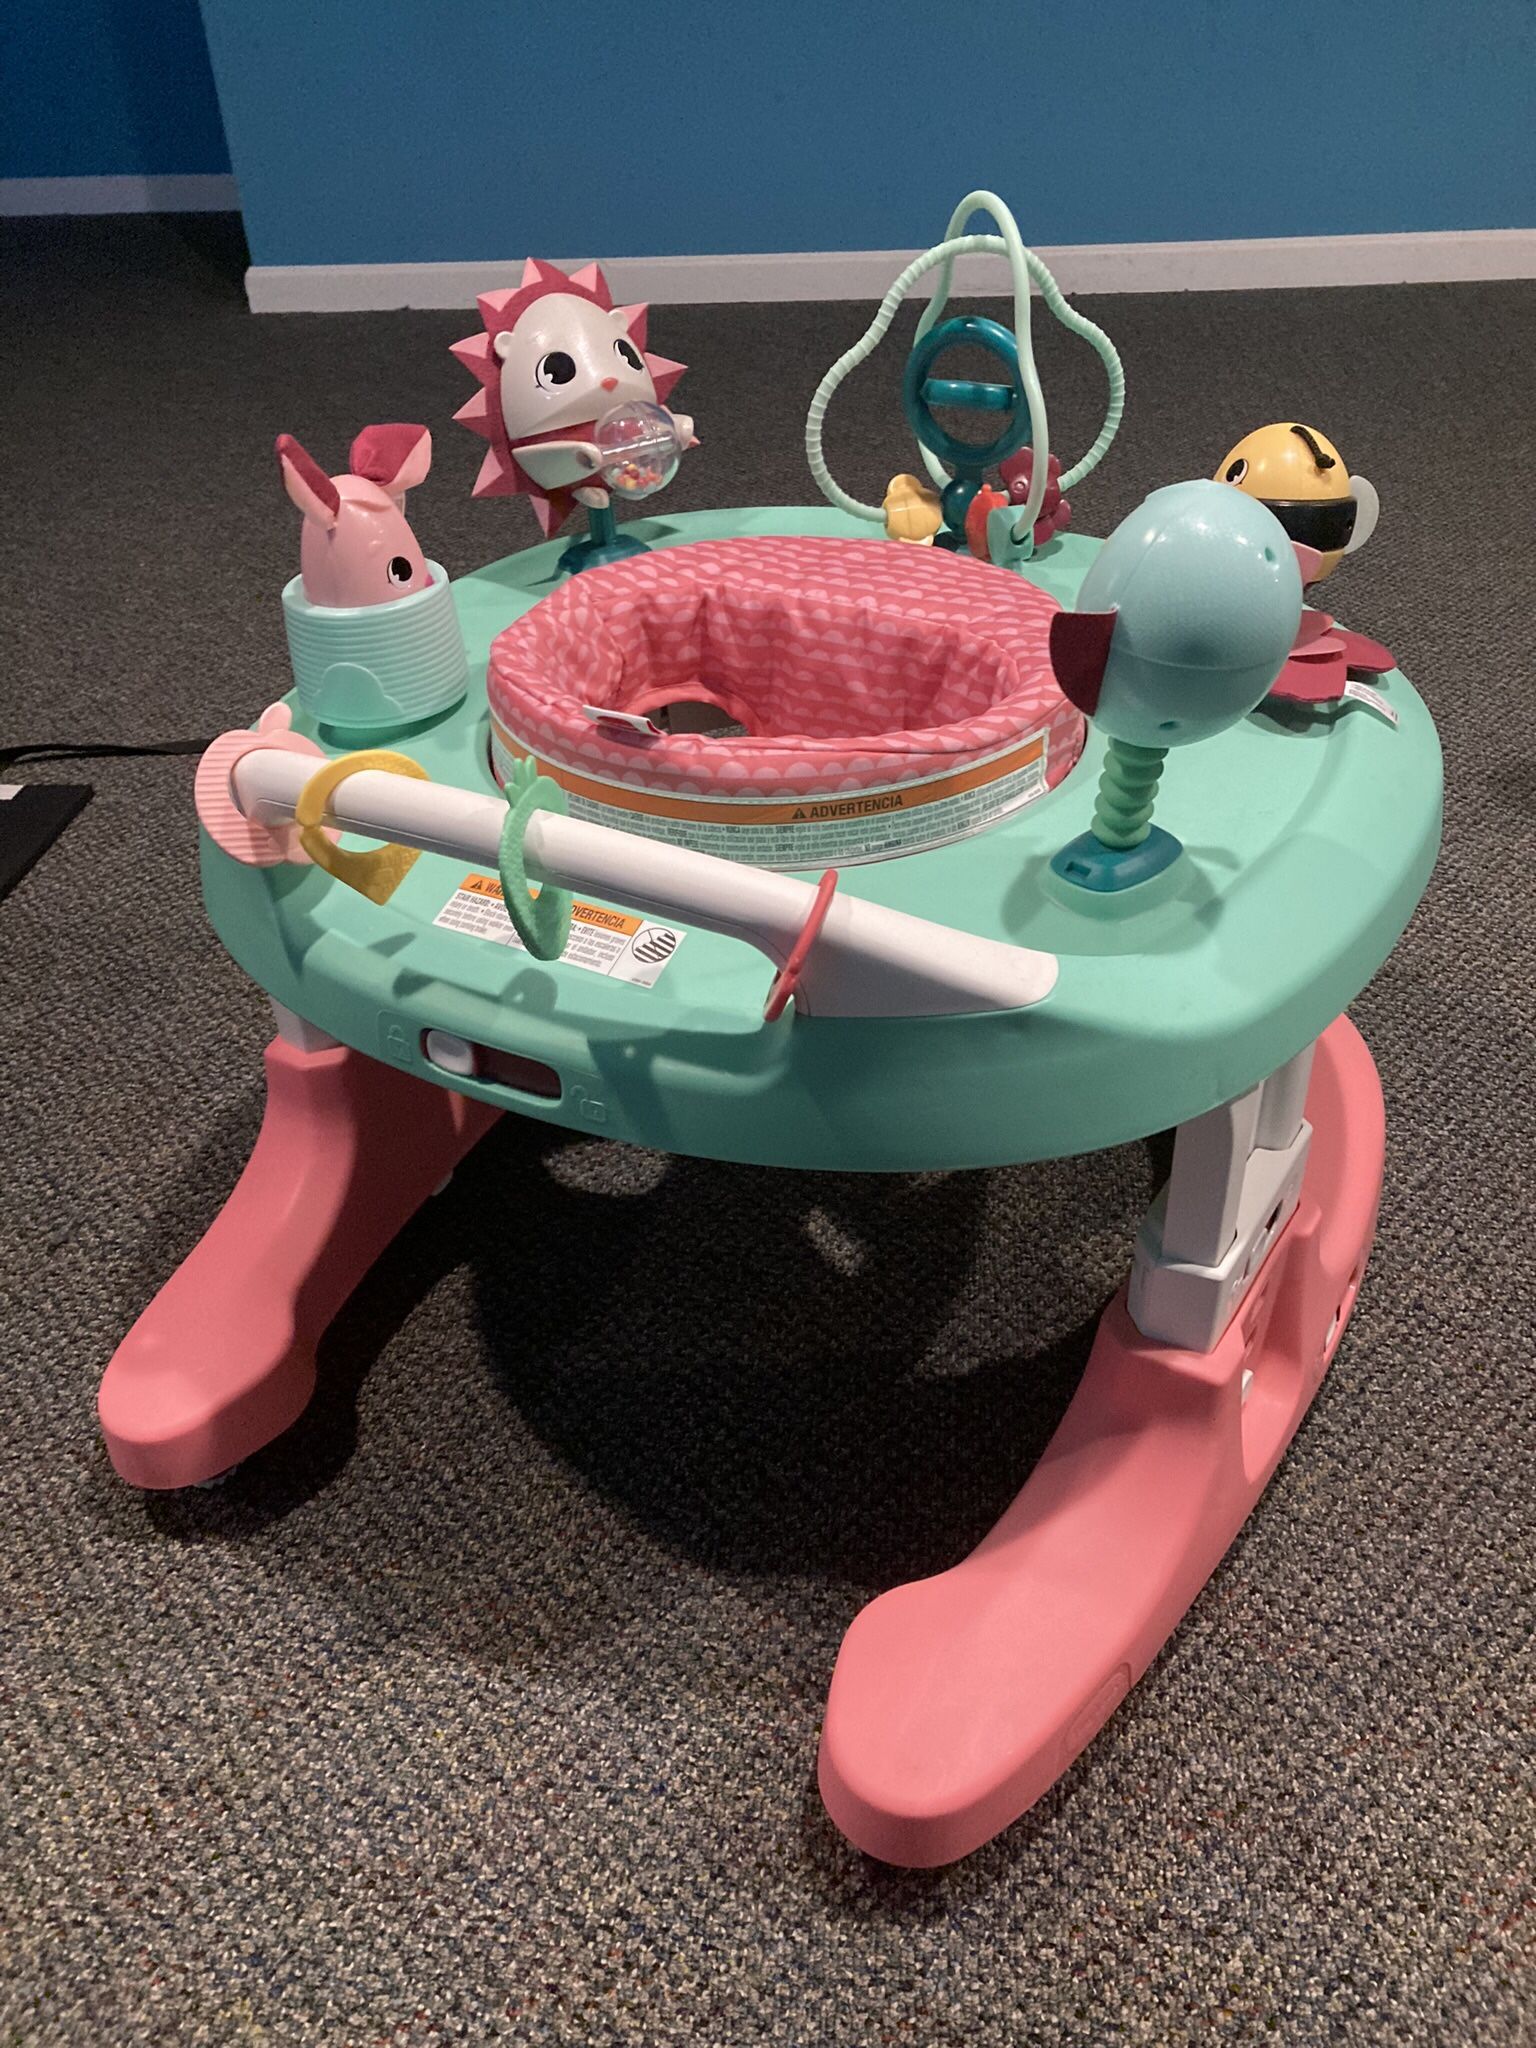 Target Tiny Love 4-in-1 Here I Grow Baby Mobile Activity Center. Like Brand New, Used Twice. $87.99 New.